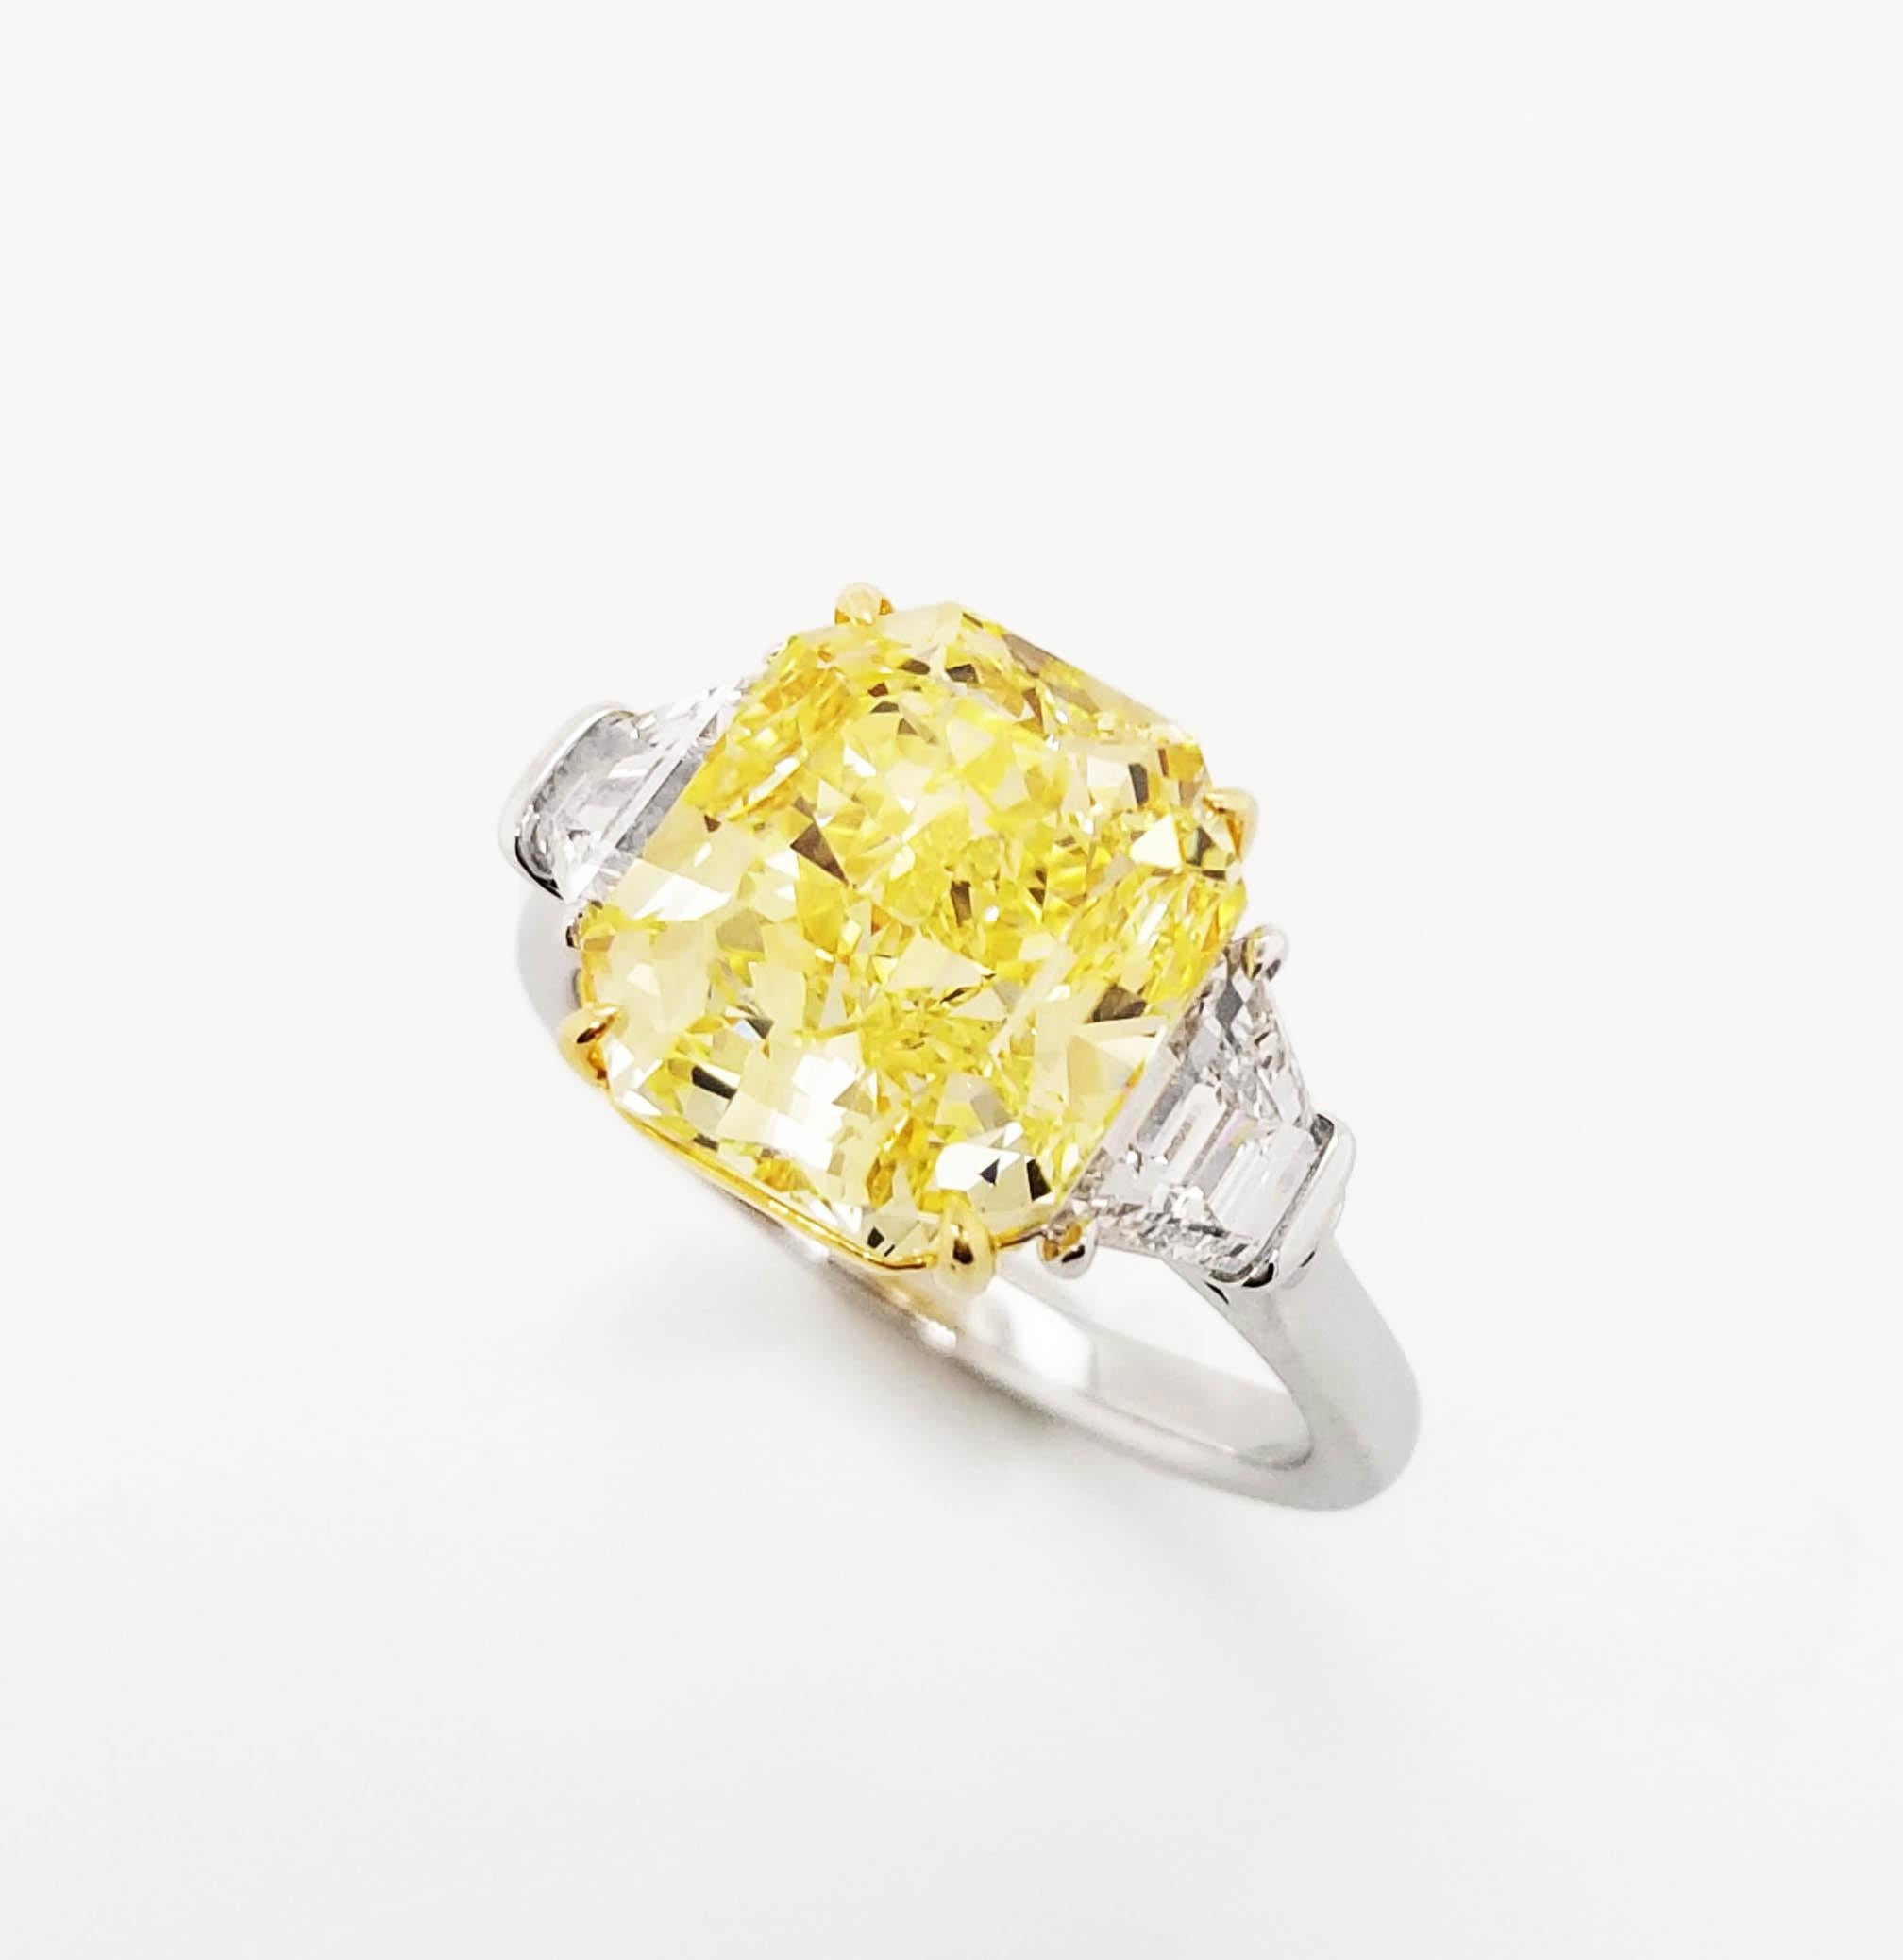 SCARSELLI is featuring a 5+ carat Fancy Intense Yellow Radiant Cut Diamond VS1 clarity, certified by GIA ( see certificate picture for detailed stone information) flanked by a pair of trapezoids VS diamonds totaling 0.92 carats set in handmade 18k